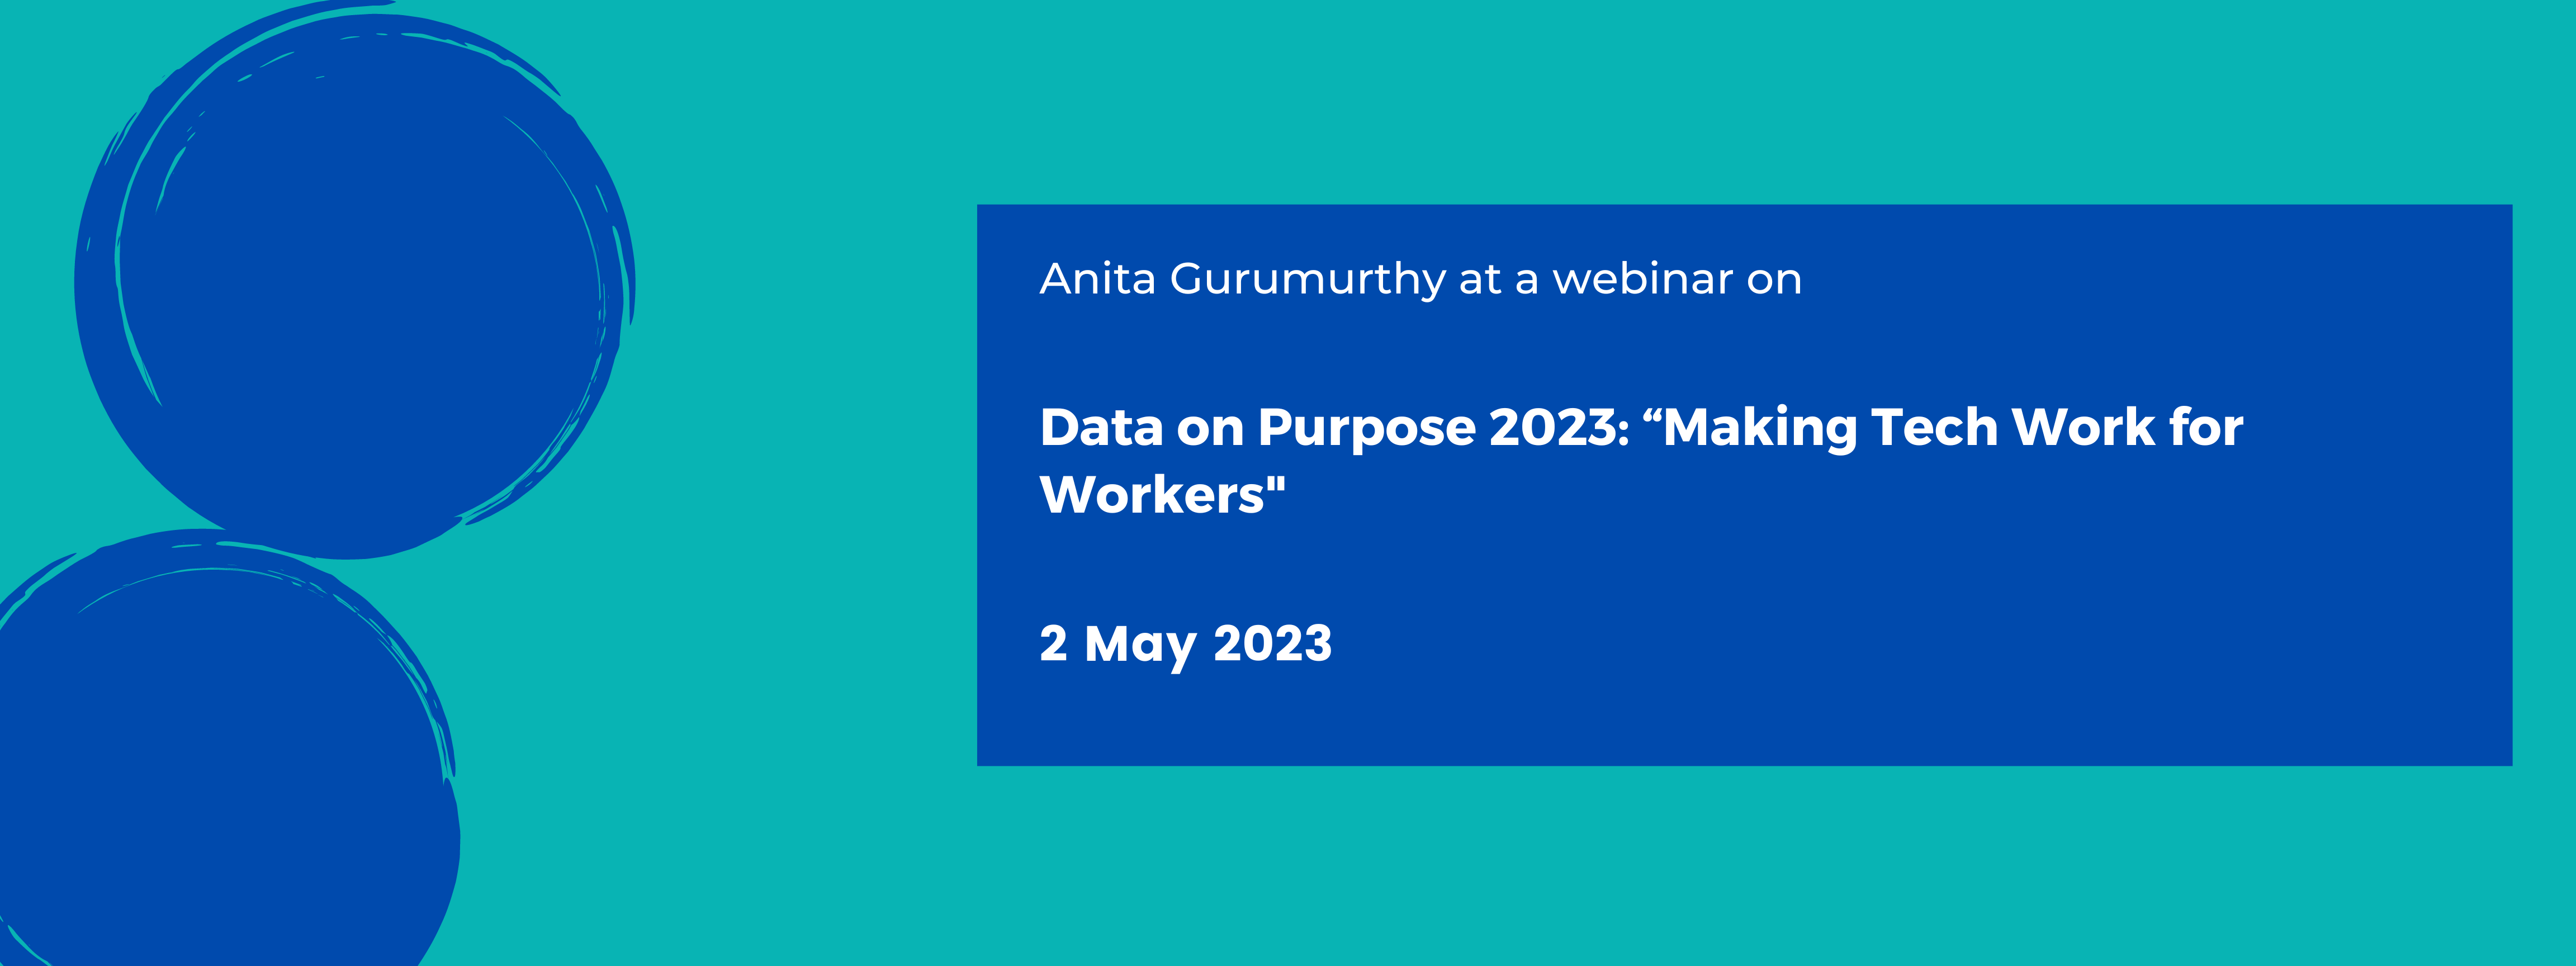 Data on Purpose 2023: “Making Tech Work for Workers"